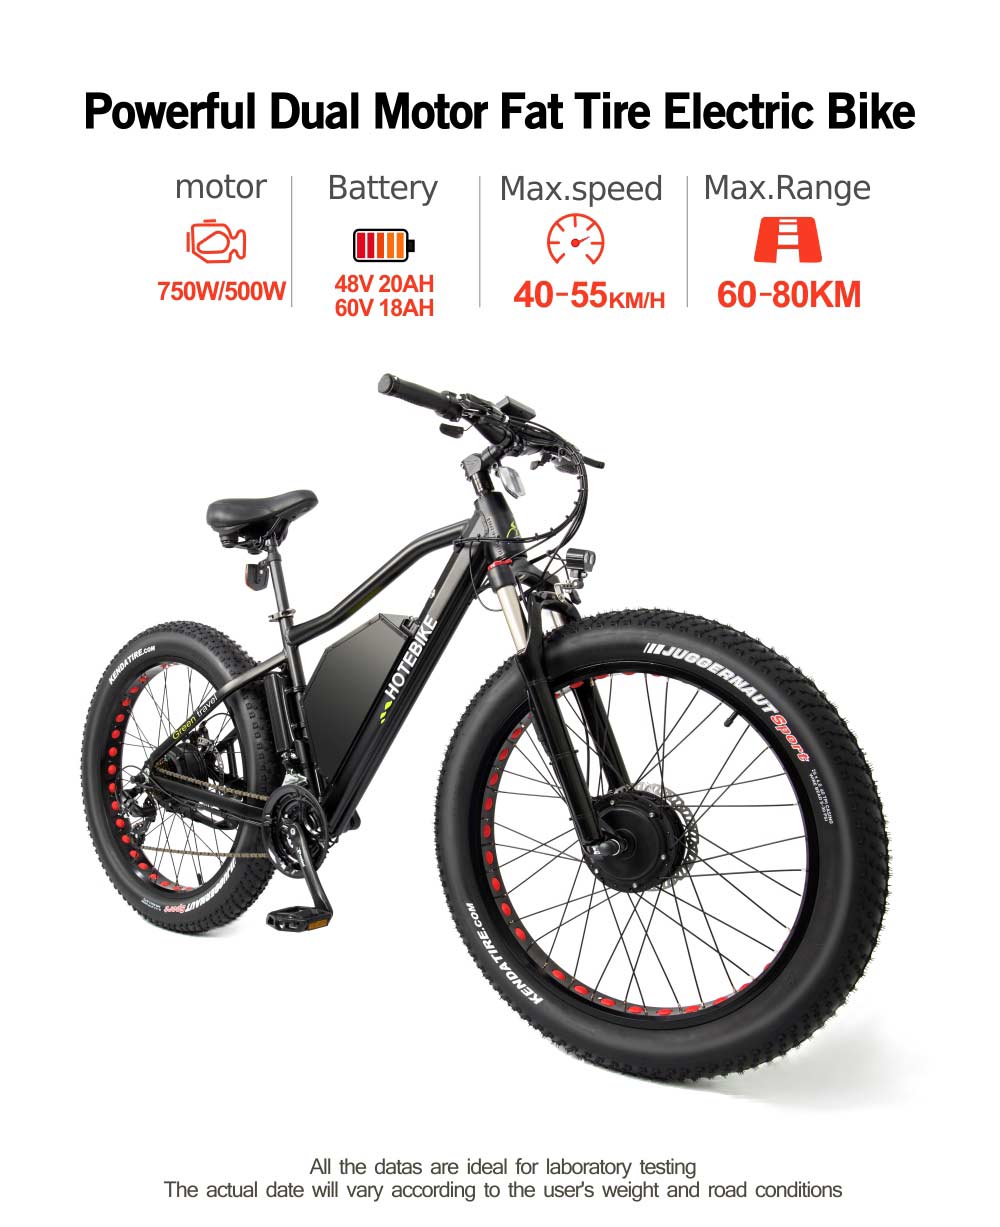 2020 Harley Davidson Livewire Review Cycle News Vs Fat Tire Ebike A7at26 Ebike Shuangye